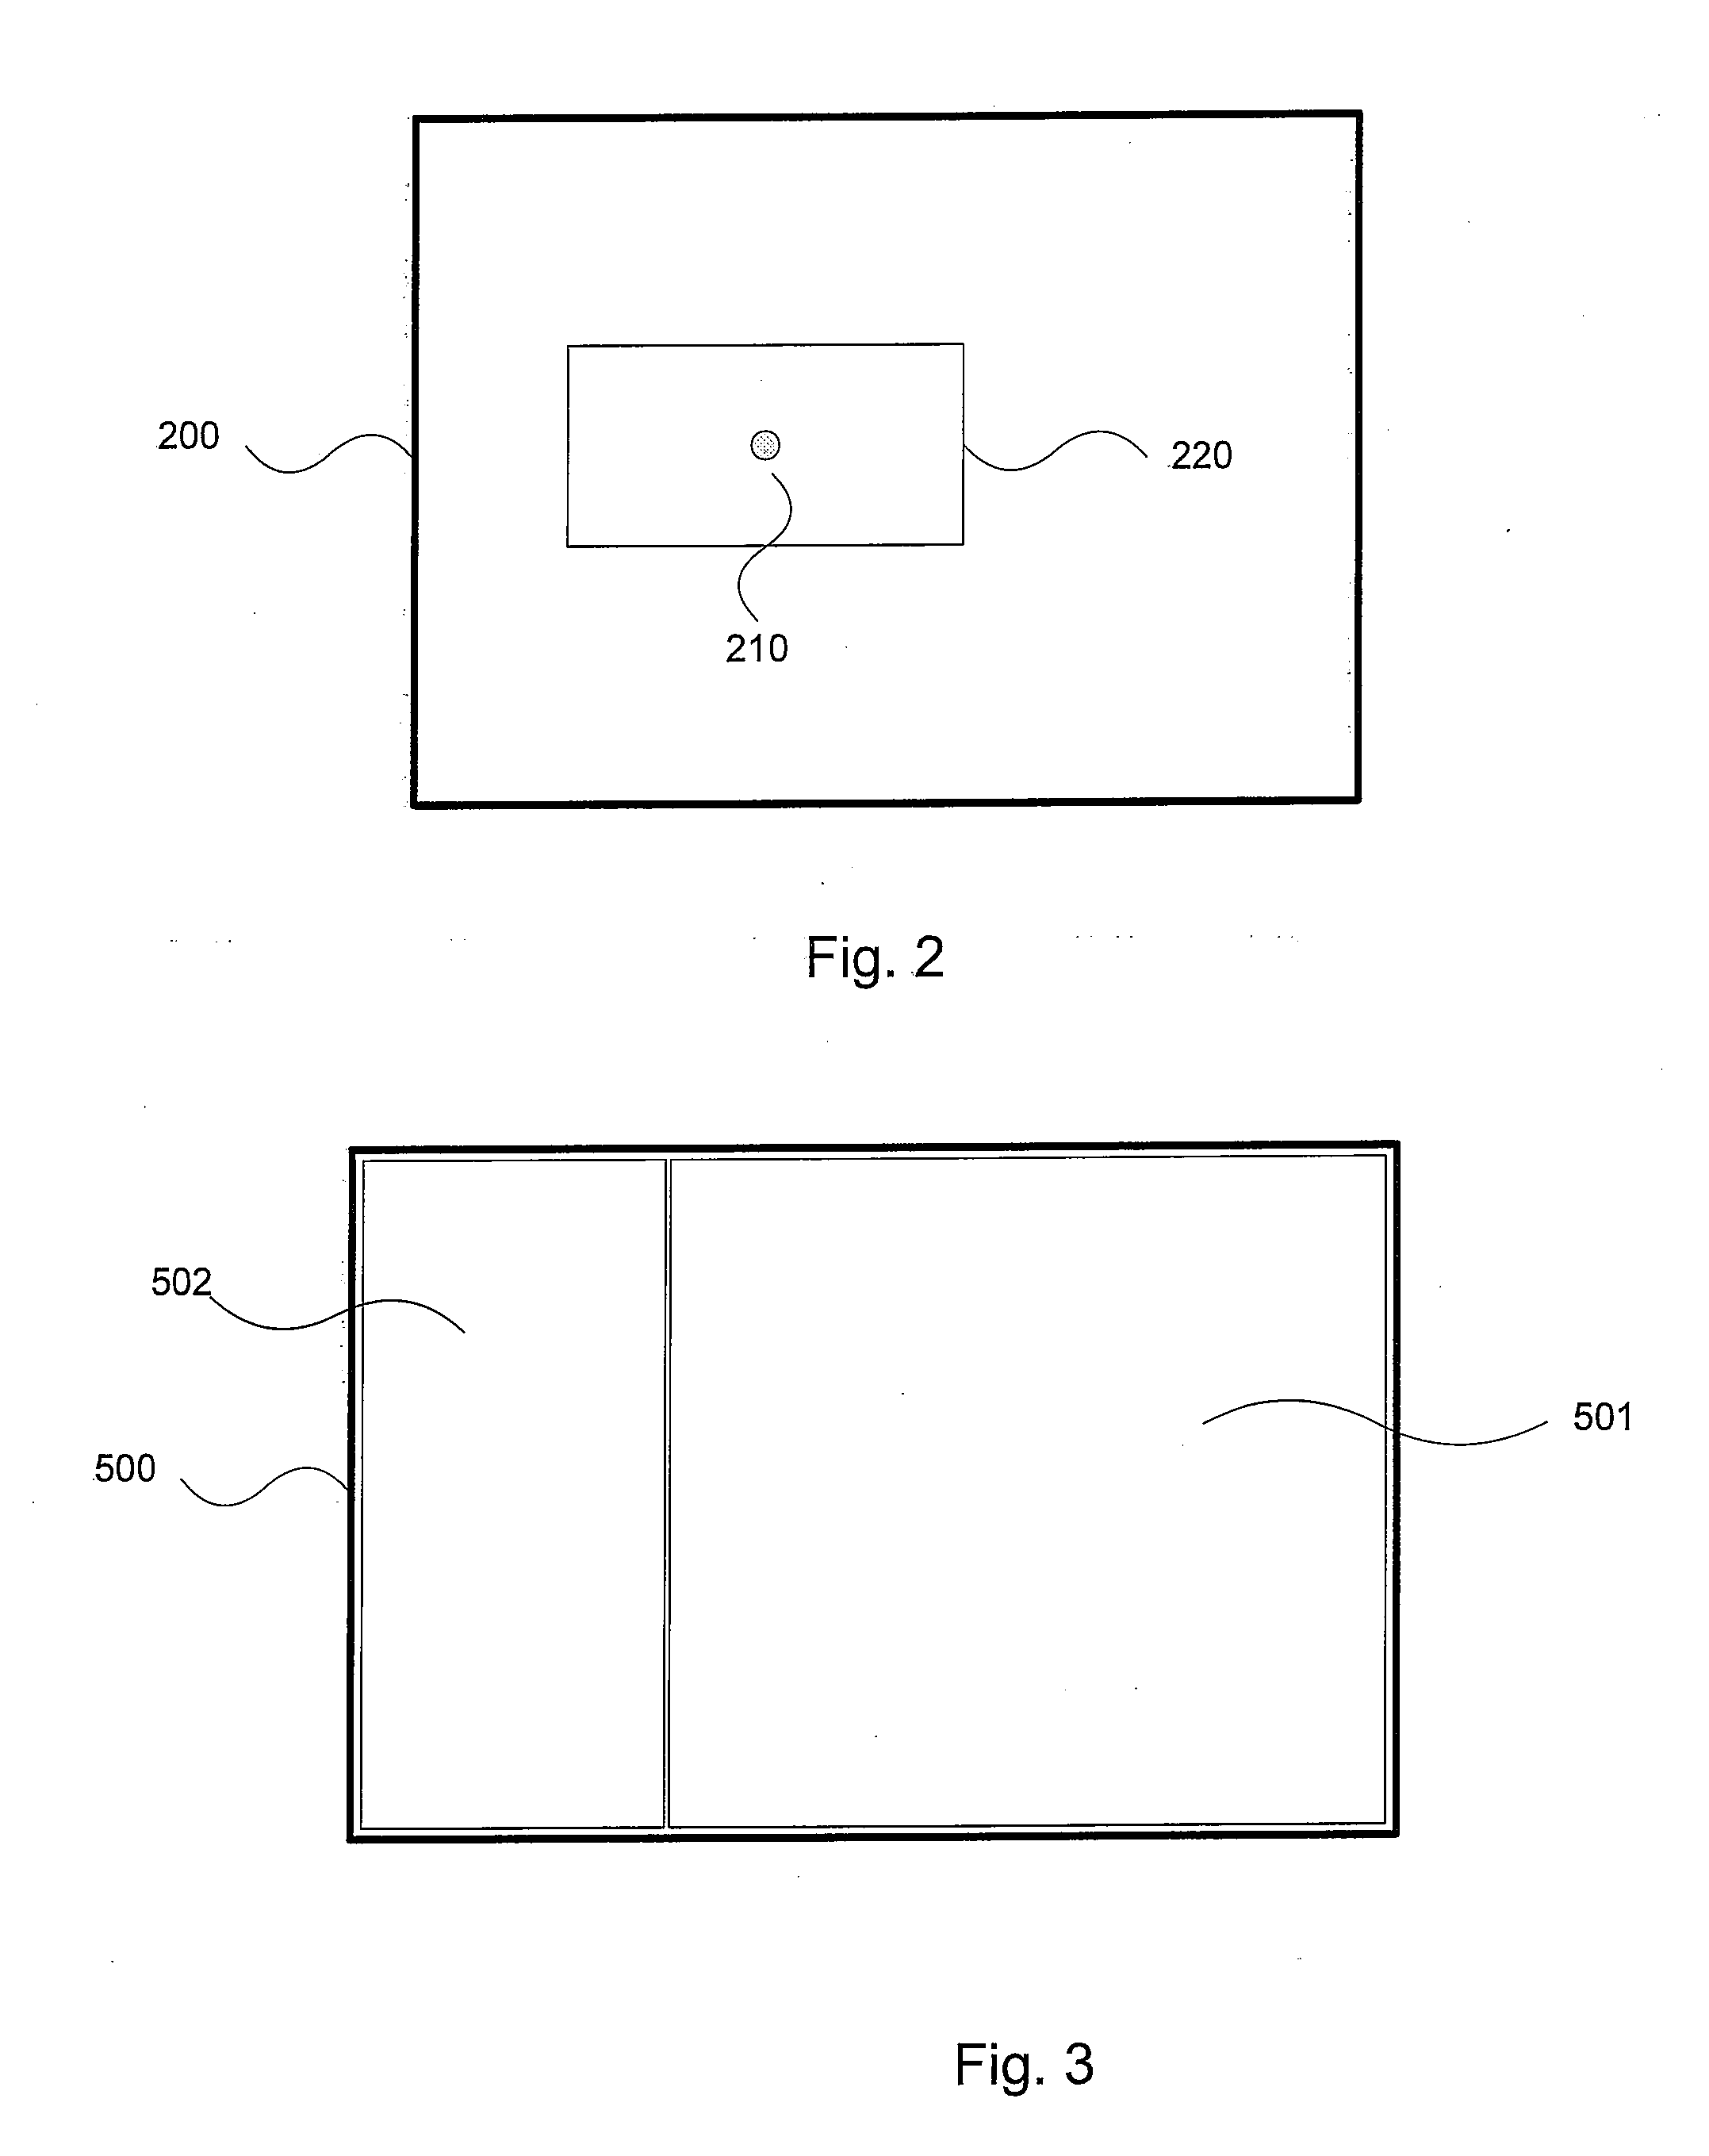 Method and system arranged for filtering an image